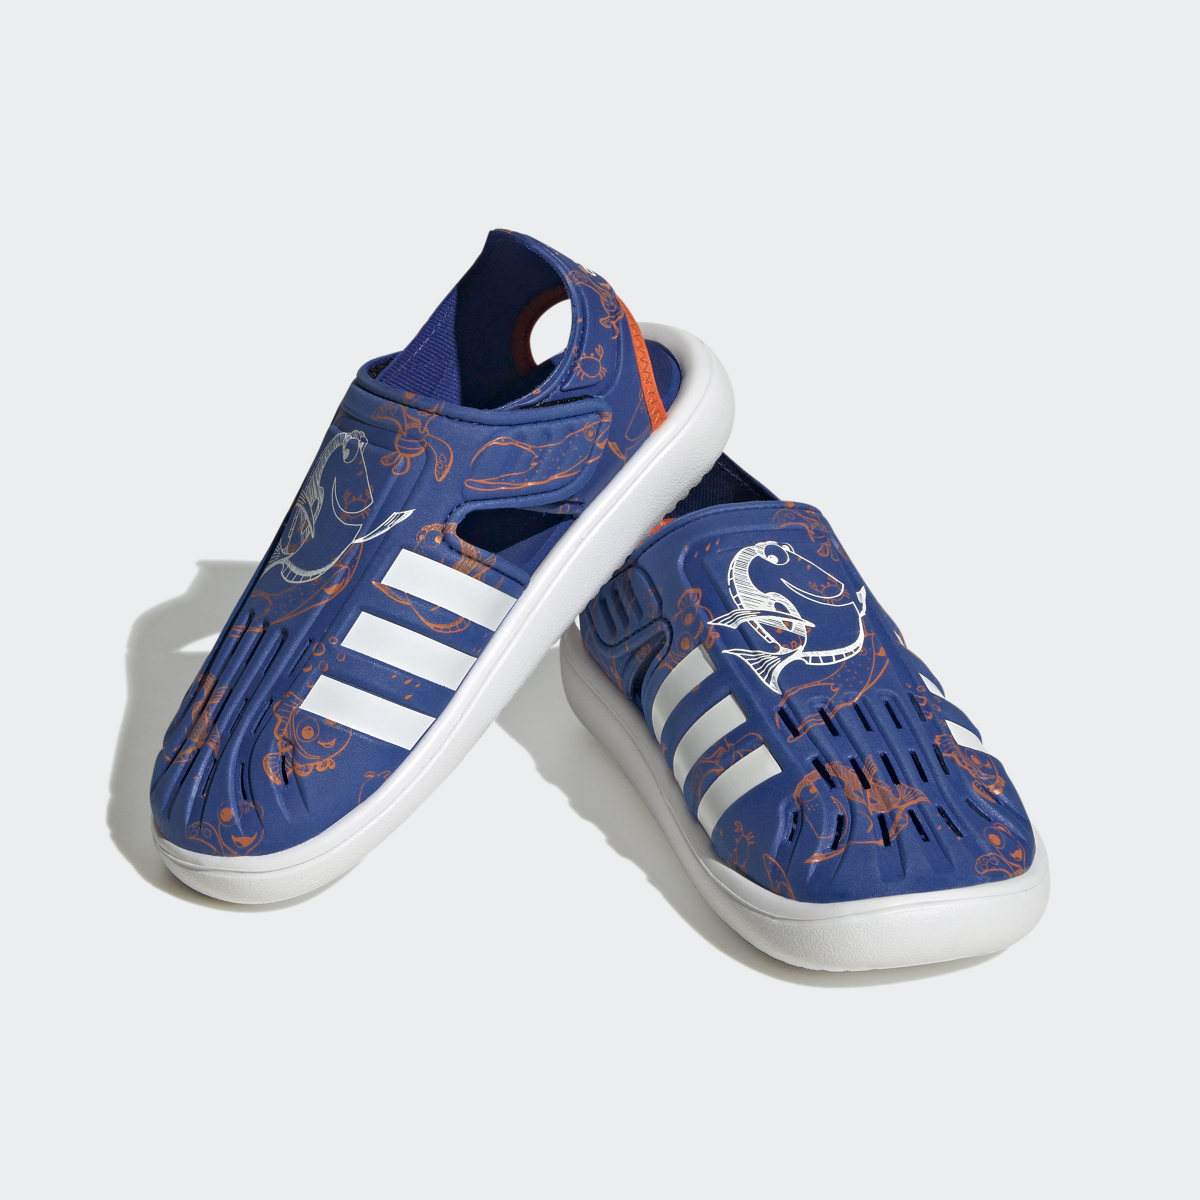 Adidas Finding Nemo and Dory Closed Toe Summer Sandalet. 5